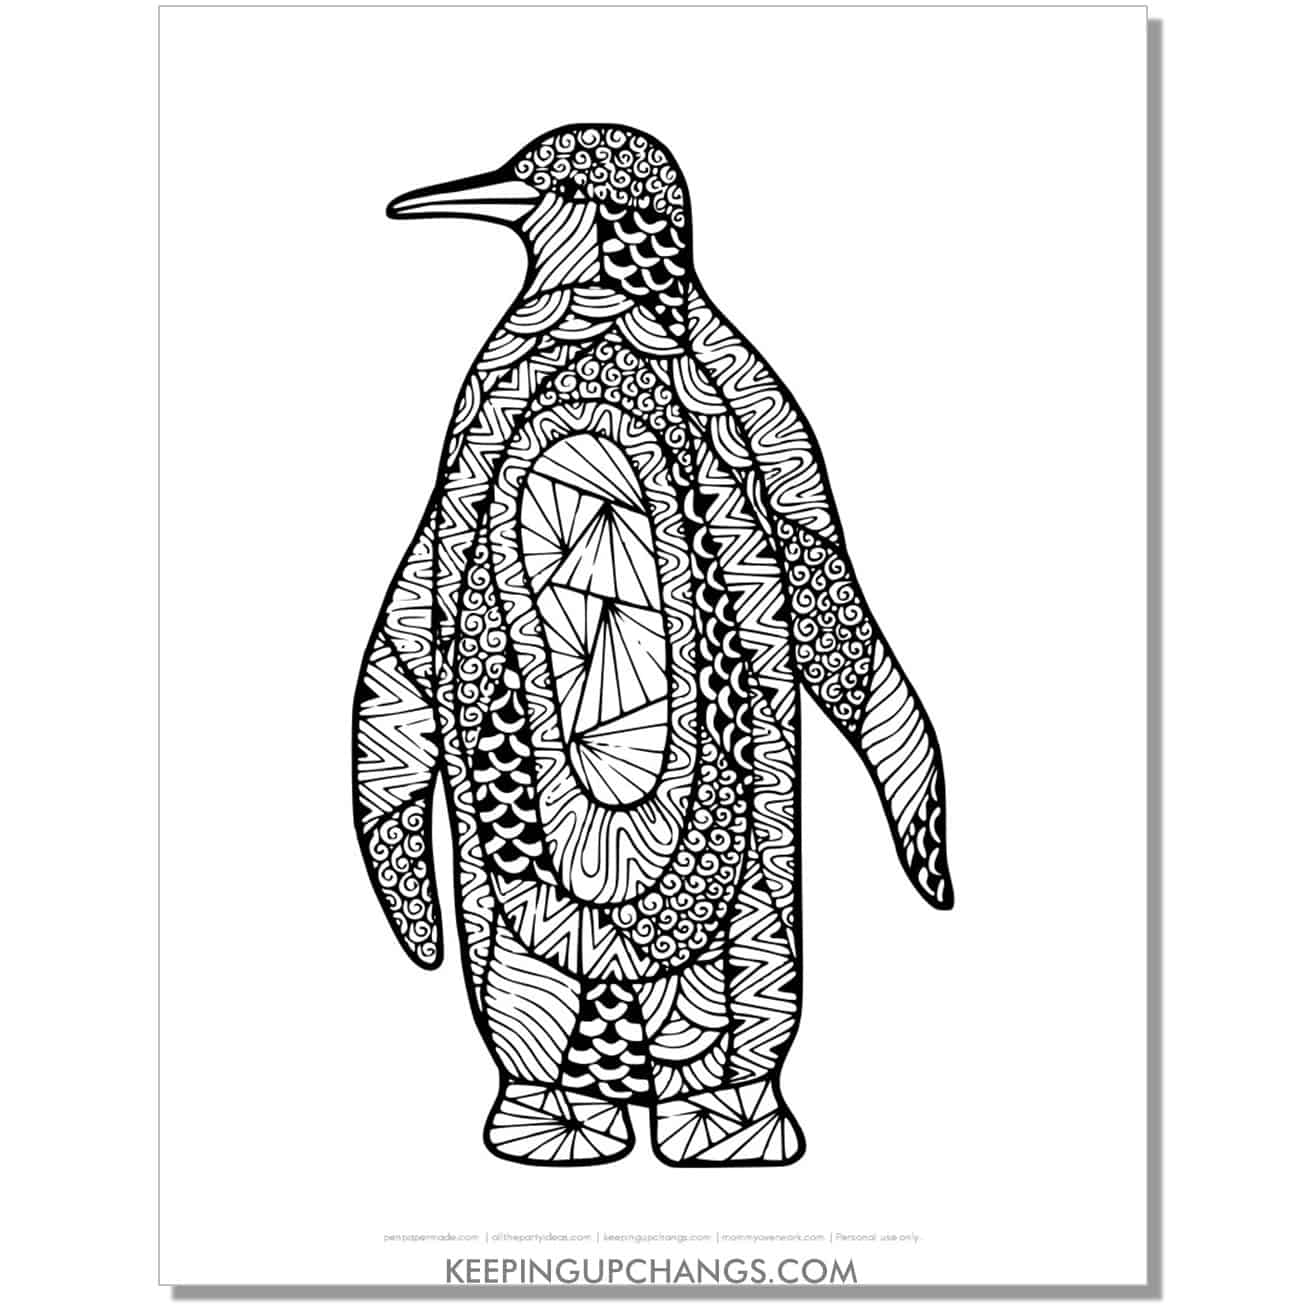 free detailed zentangle mandala penguin coloring page for adults.